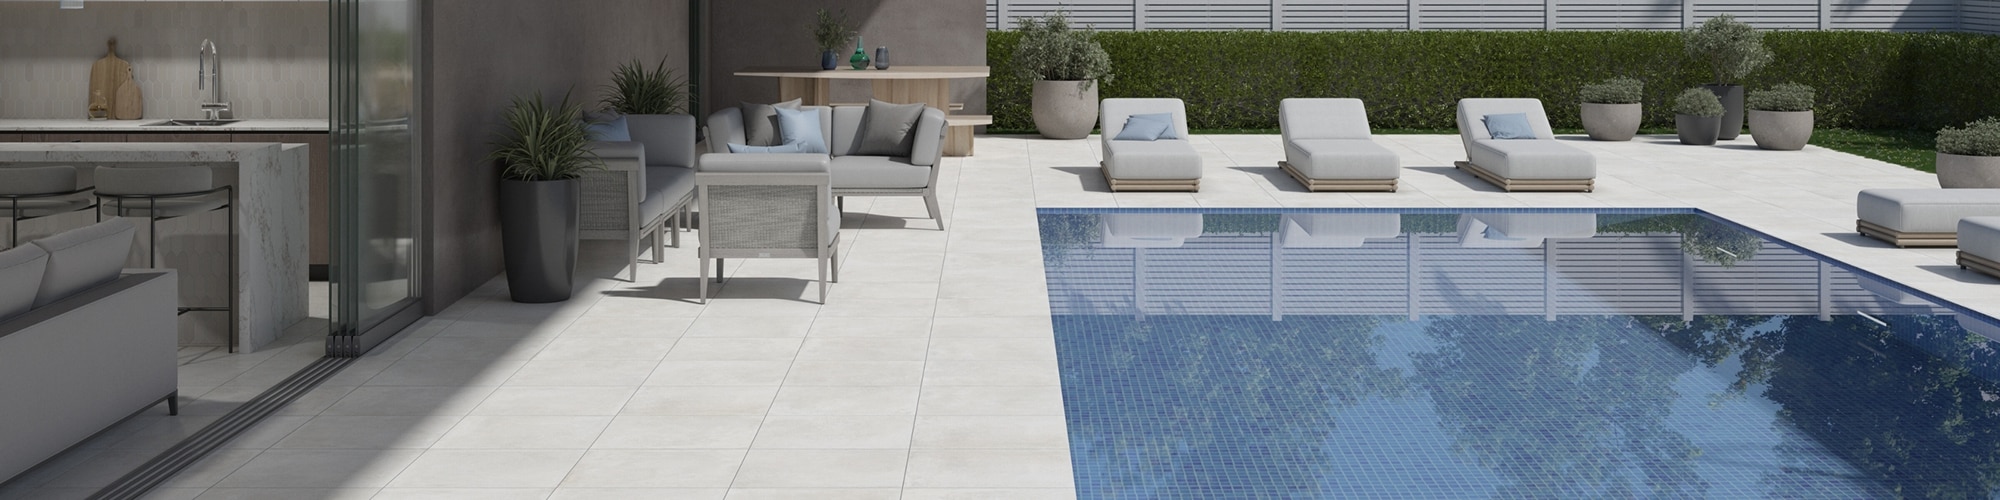 Modern home backyard with white marble look paver pool deck, pool with blue mosaic tile, gray seating area under patio cover, and cushioned lounge chairs.